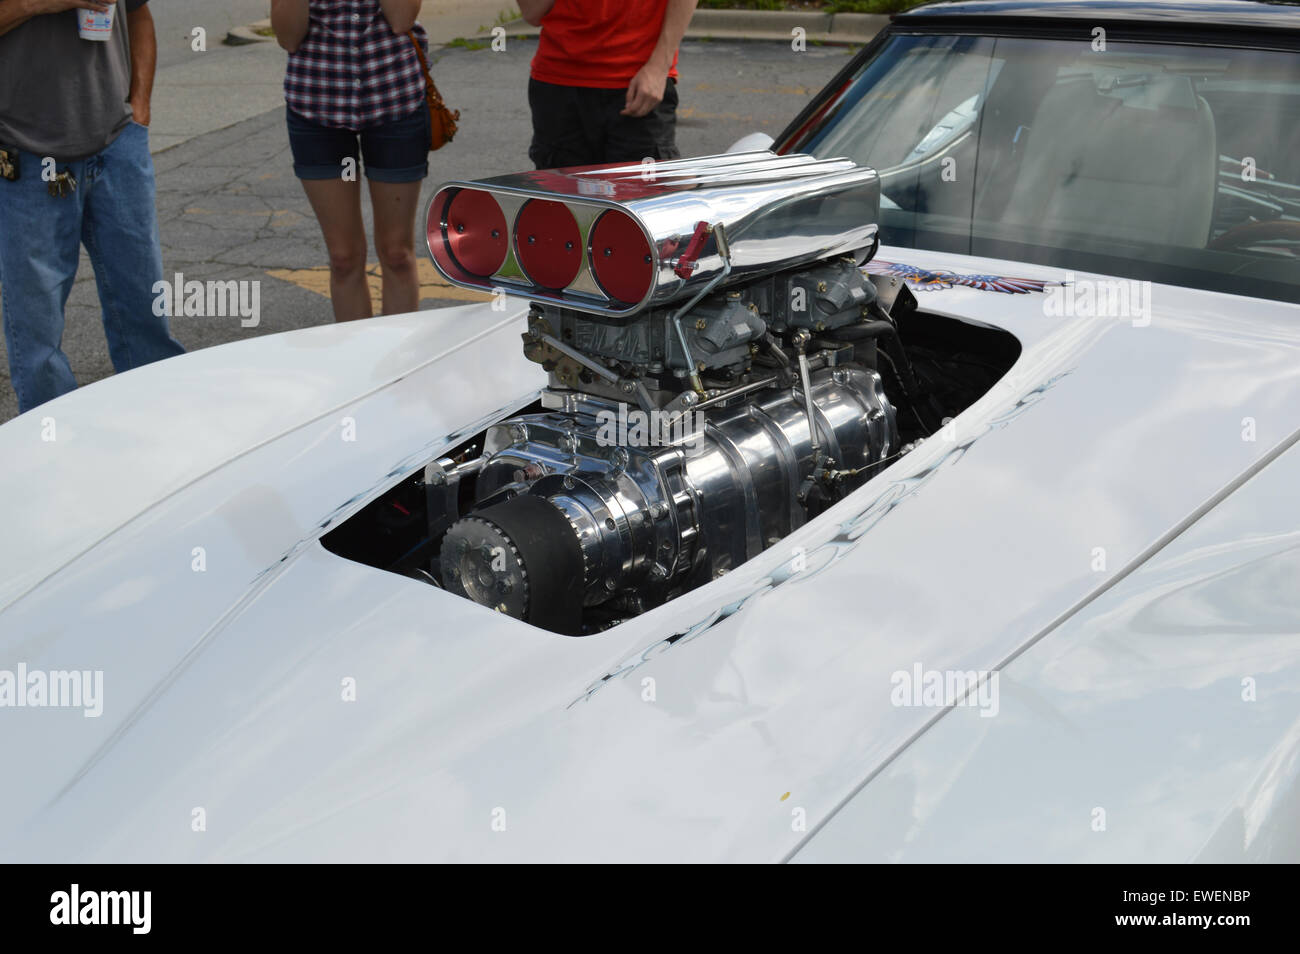 A Supercharged Engine in a vintage Corvette. Stock Photo